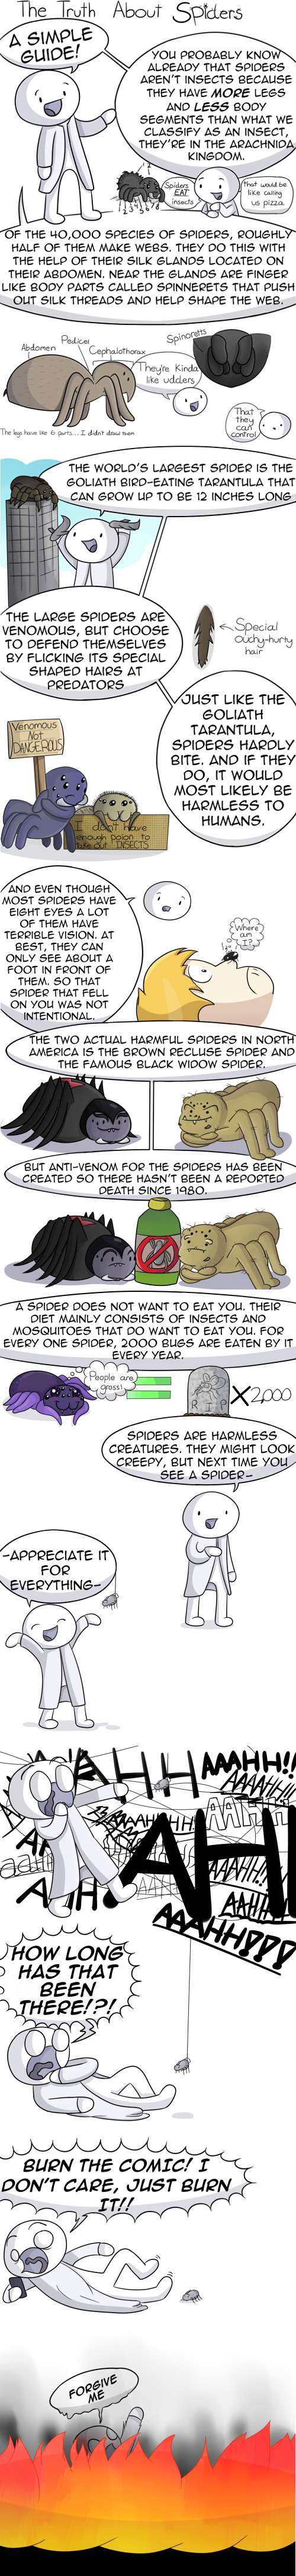 The TRUTH About Spiders